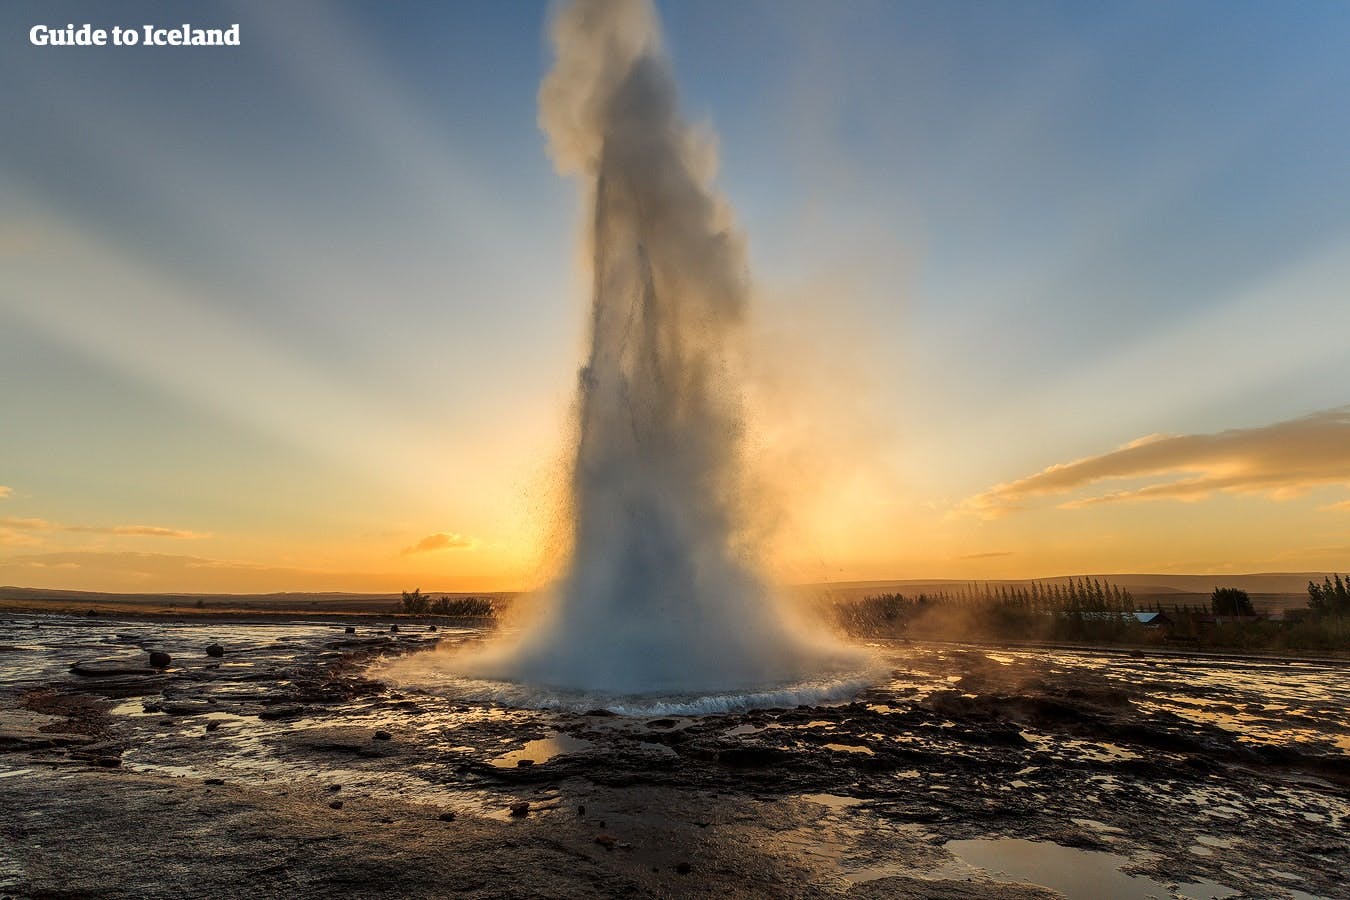 The Golden Circle is Iceland's most popular sightseeing route.